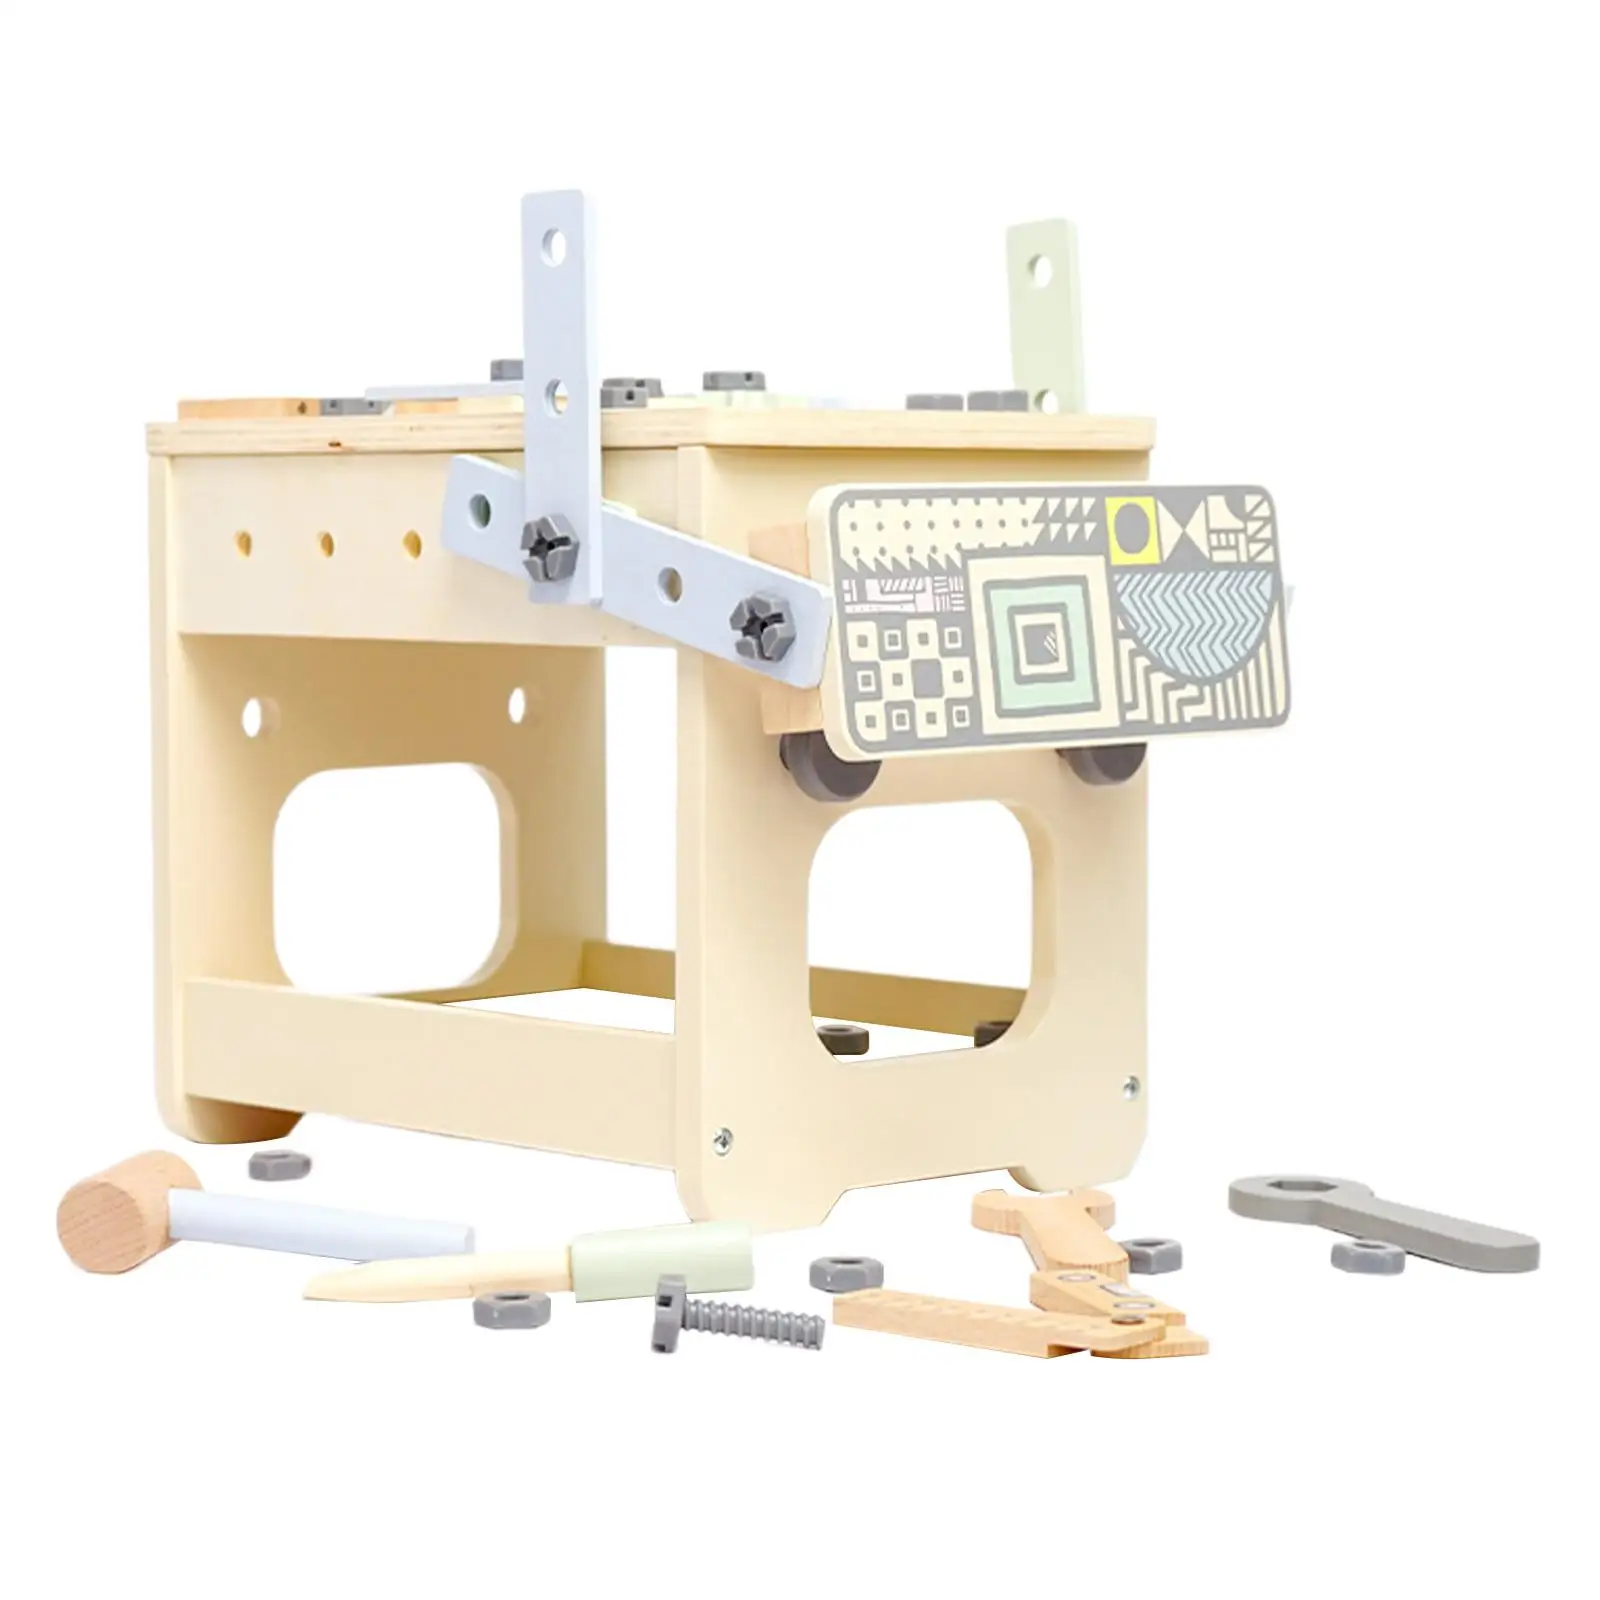 Tool Bench Wooden Construction Building Set for Role Play Preschool Outdoor